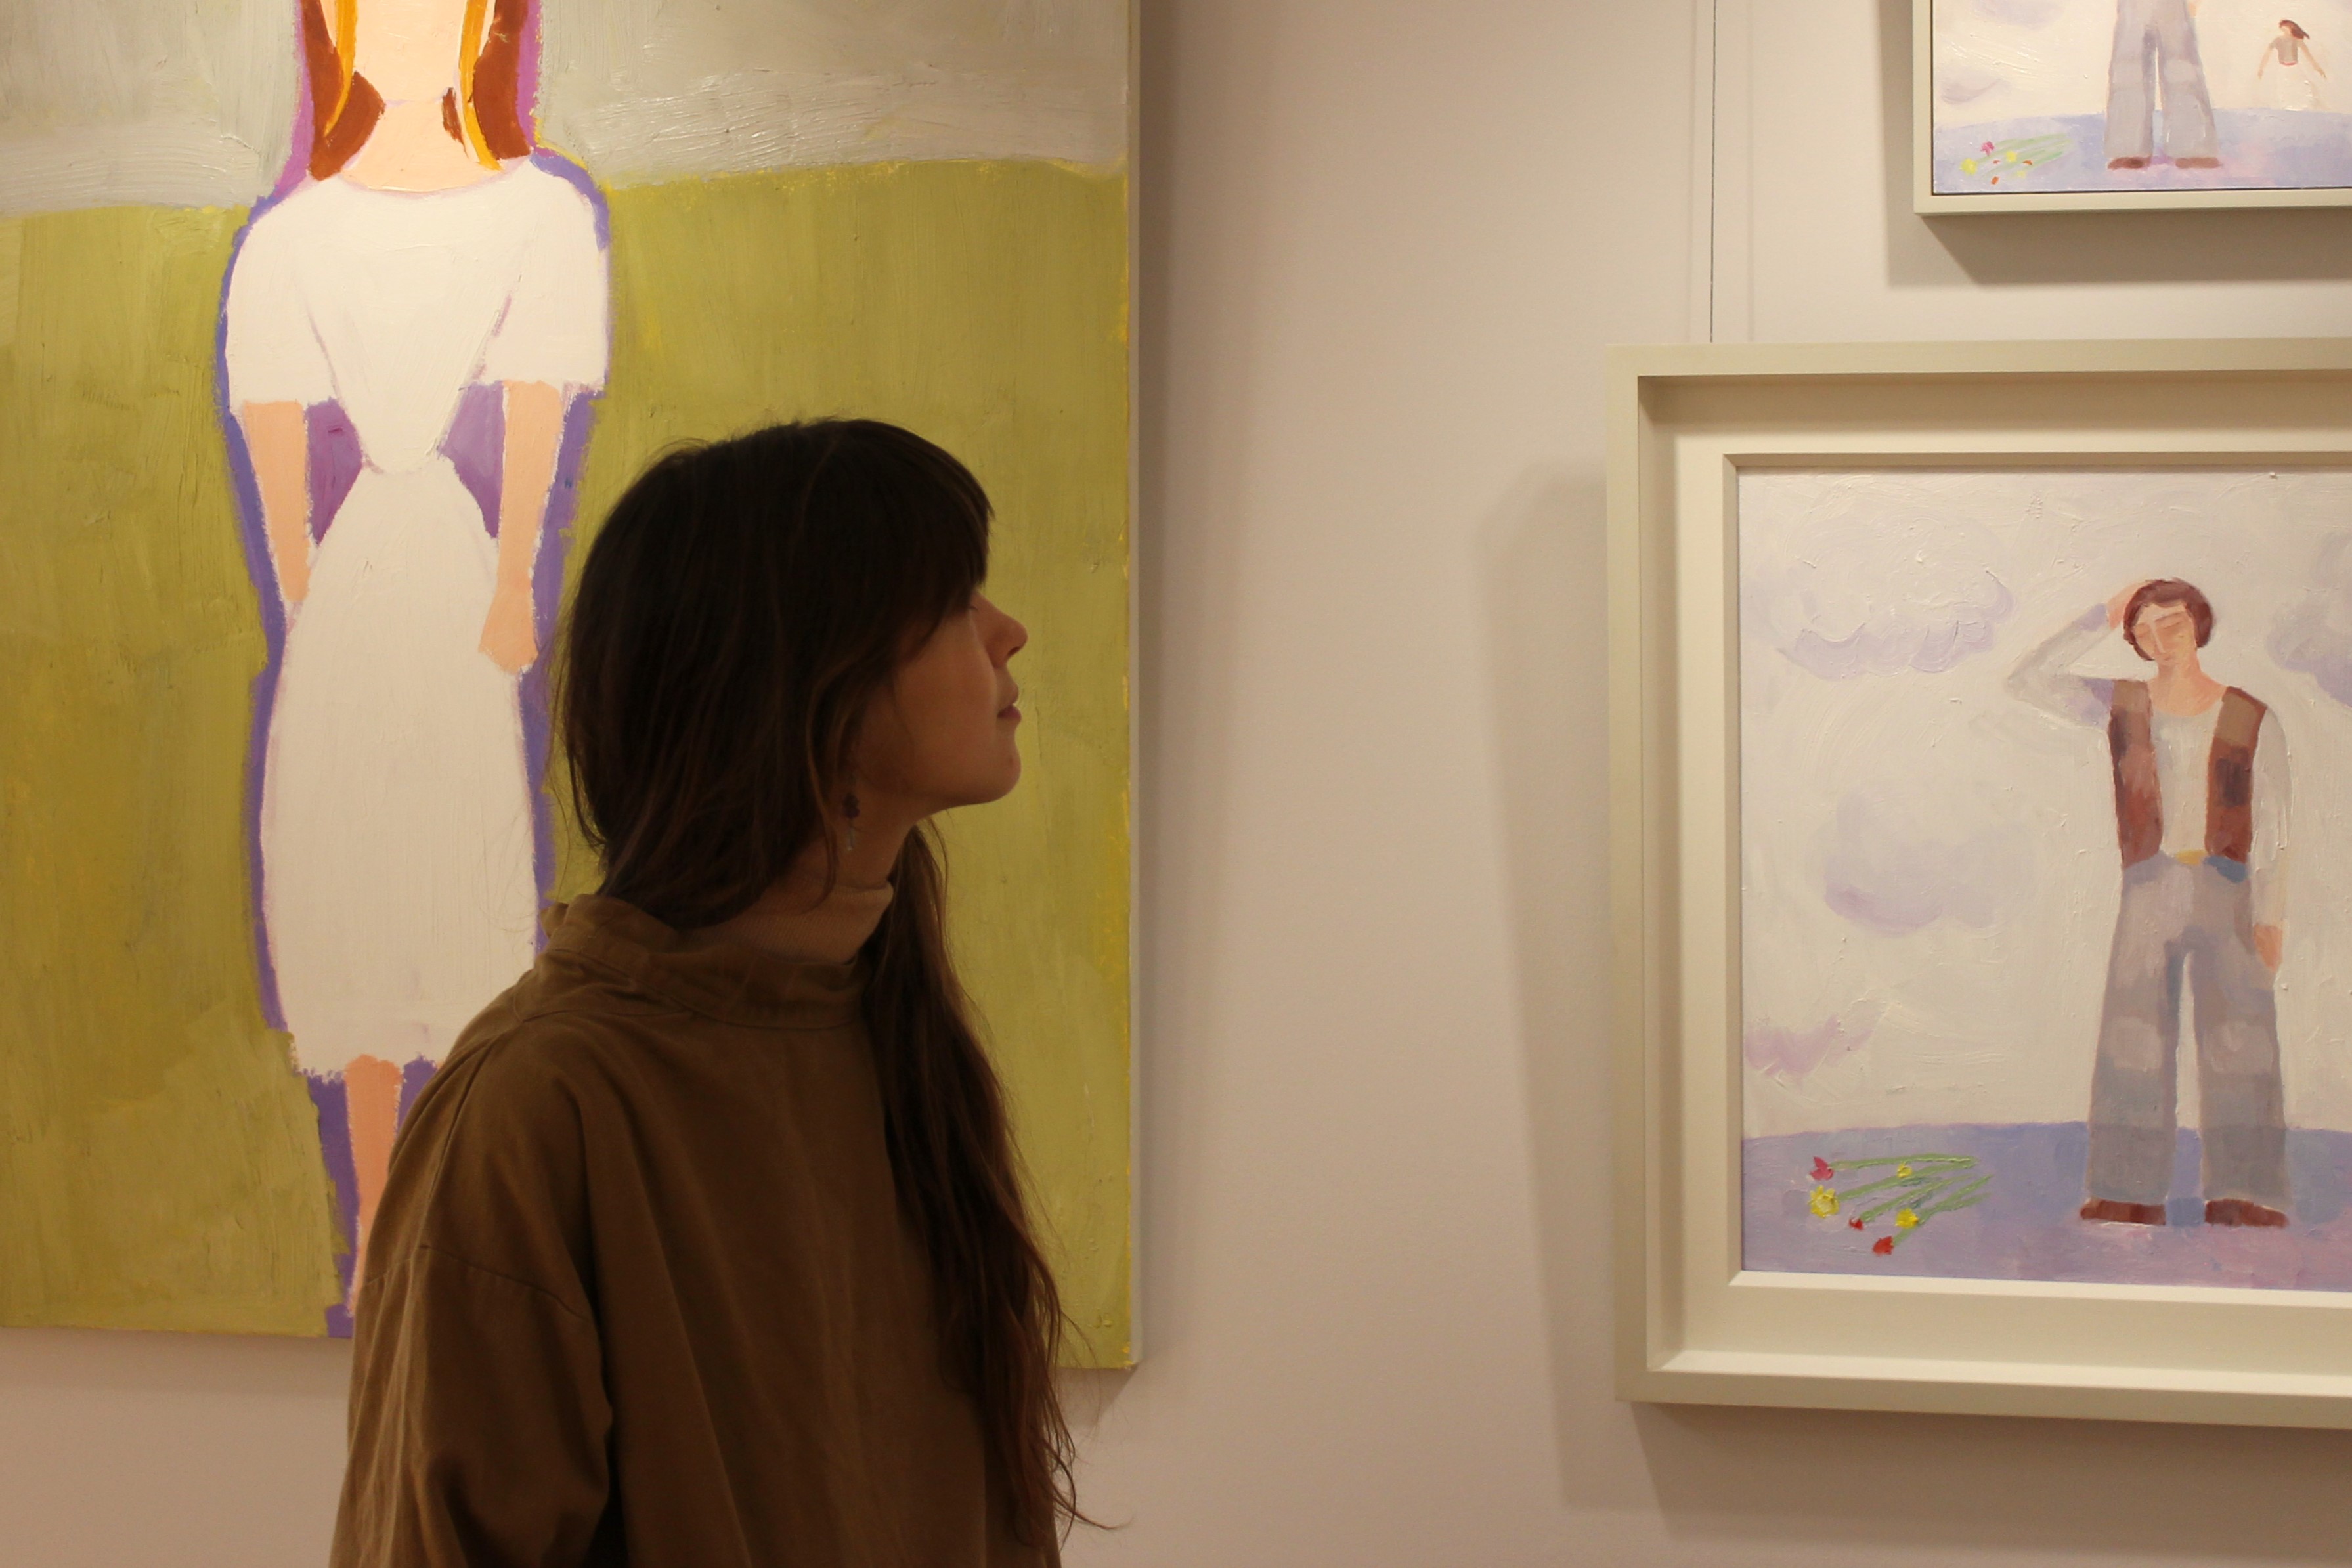 Gabriella Bailey looks at three paintings on the wall. The painting on the left is Julian Bailey's 'Tess' from Tess of the D'Urbervilles, while the right two (identical; one smaller) are Gabriella's, depicting Jude the Obscure.